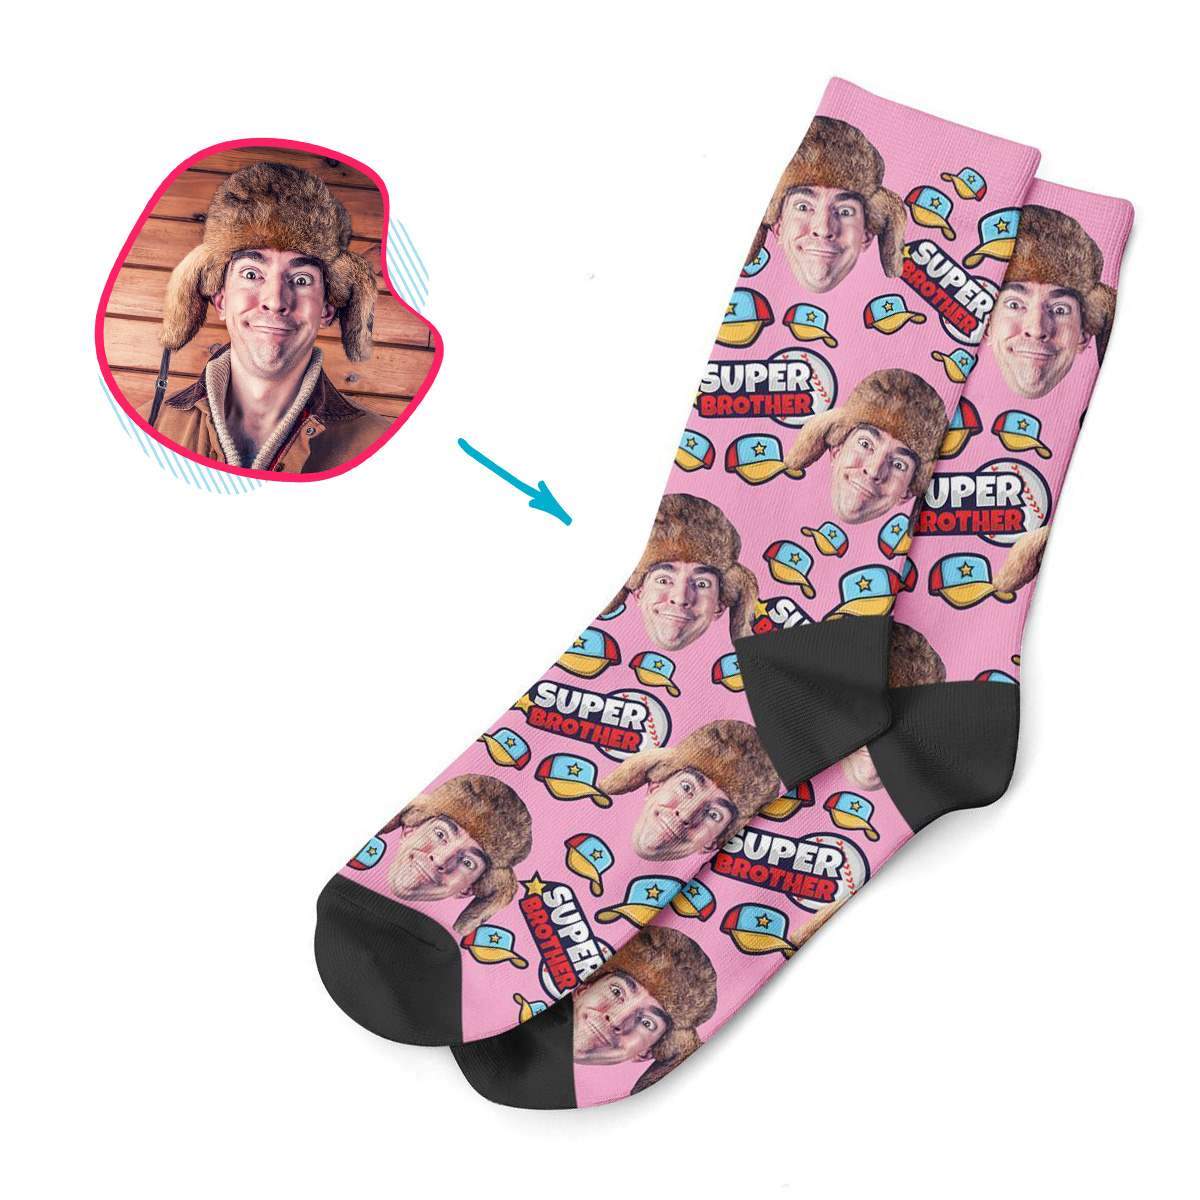 pink Super Brother socks personalized with photo of face printed on them